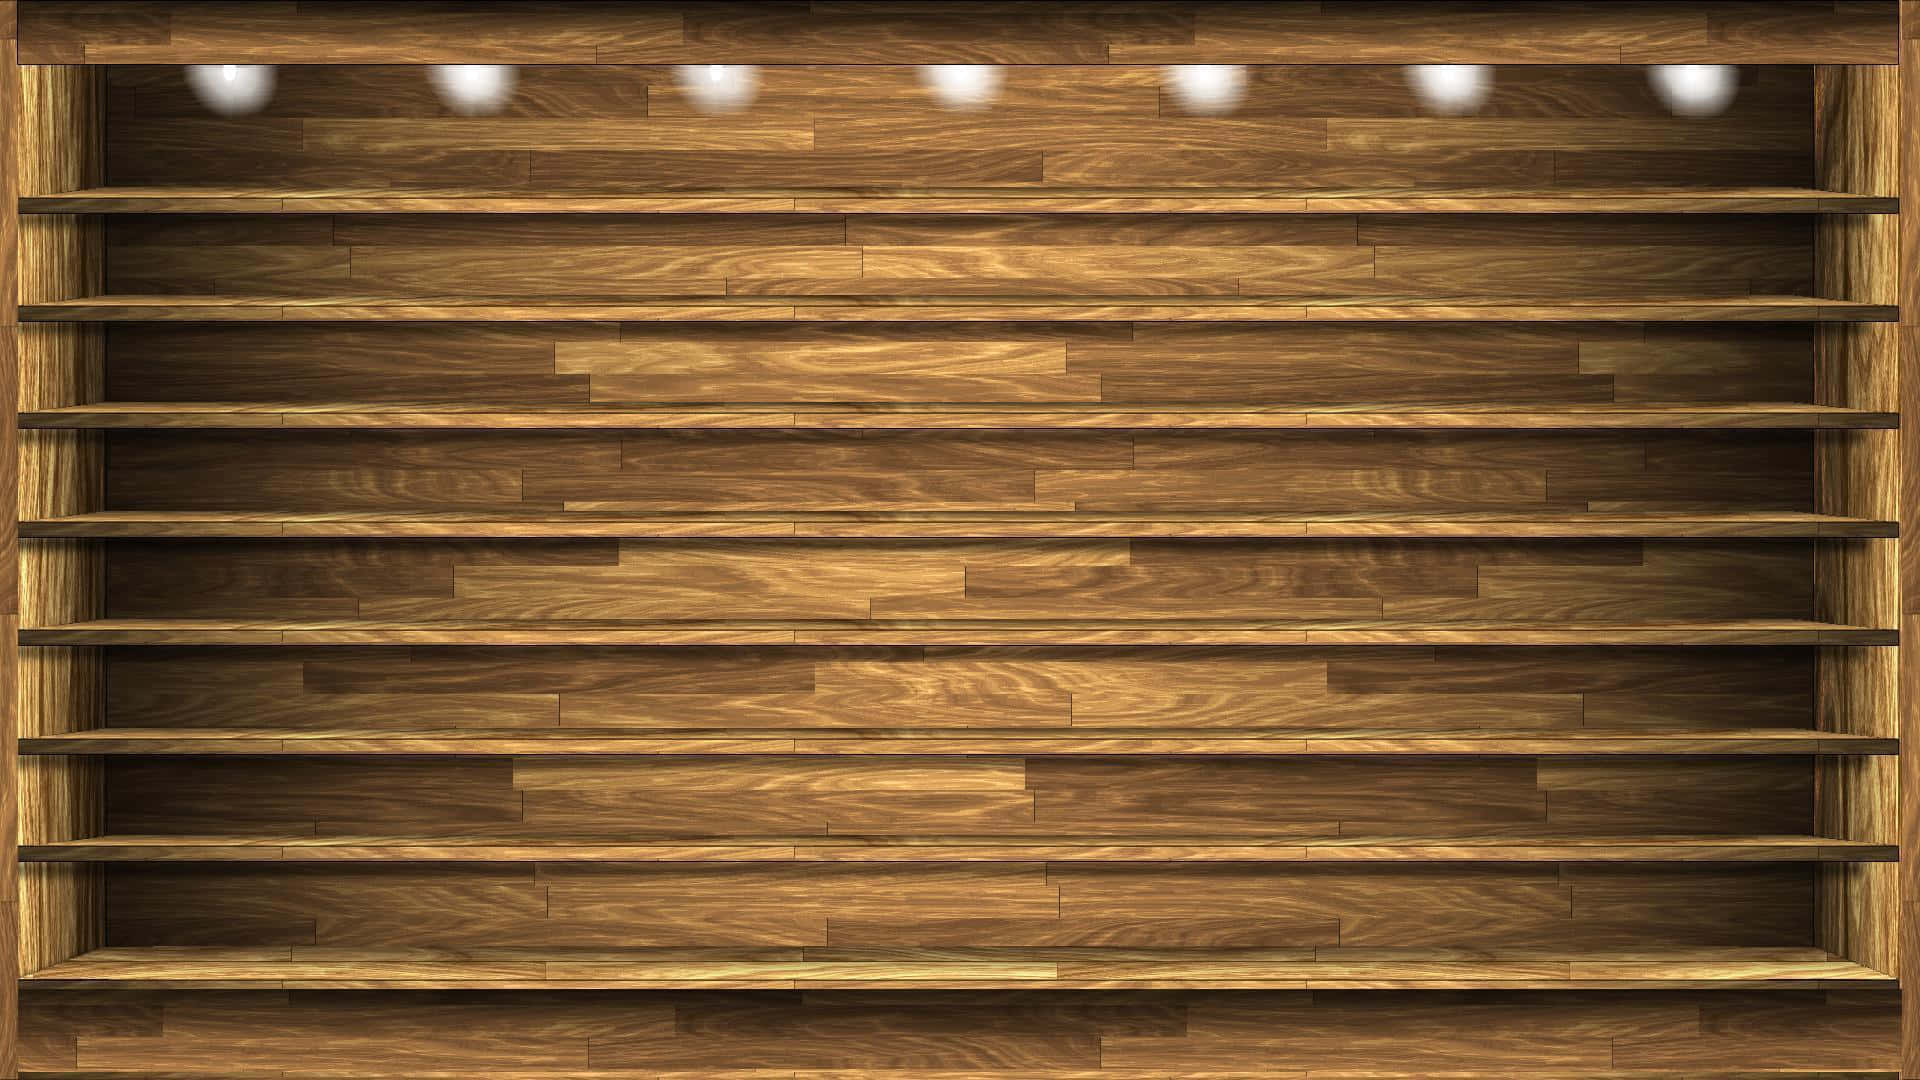 Wooden Shelves With Lights On The Wall